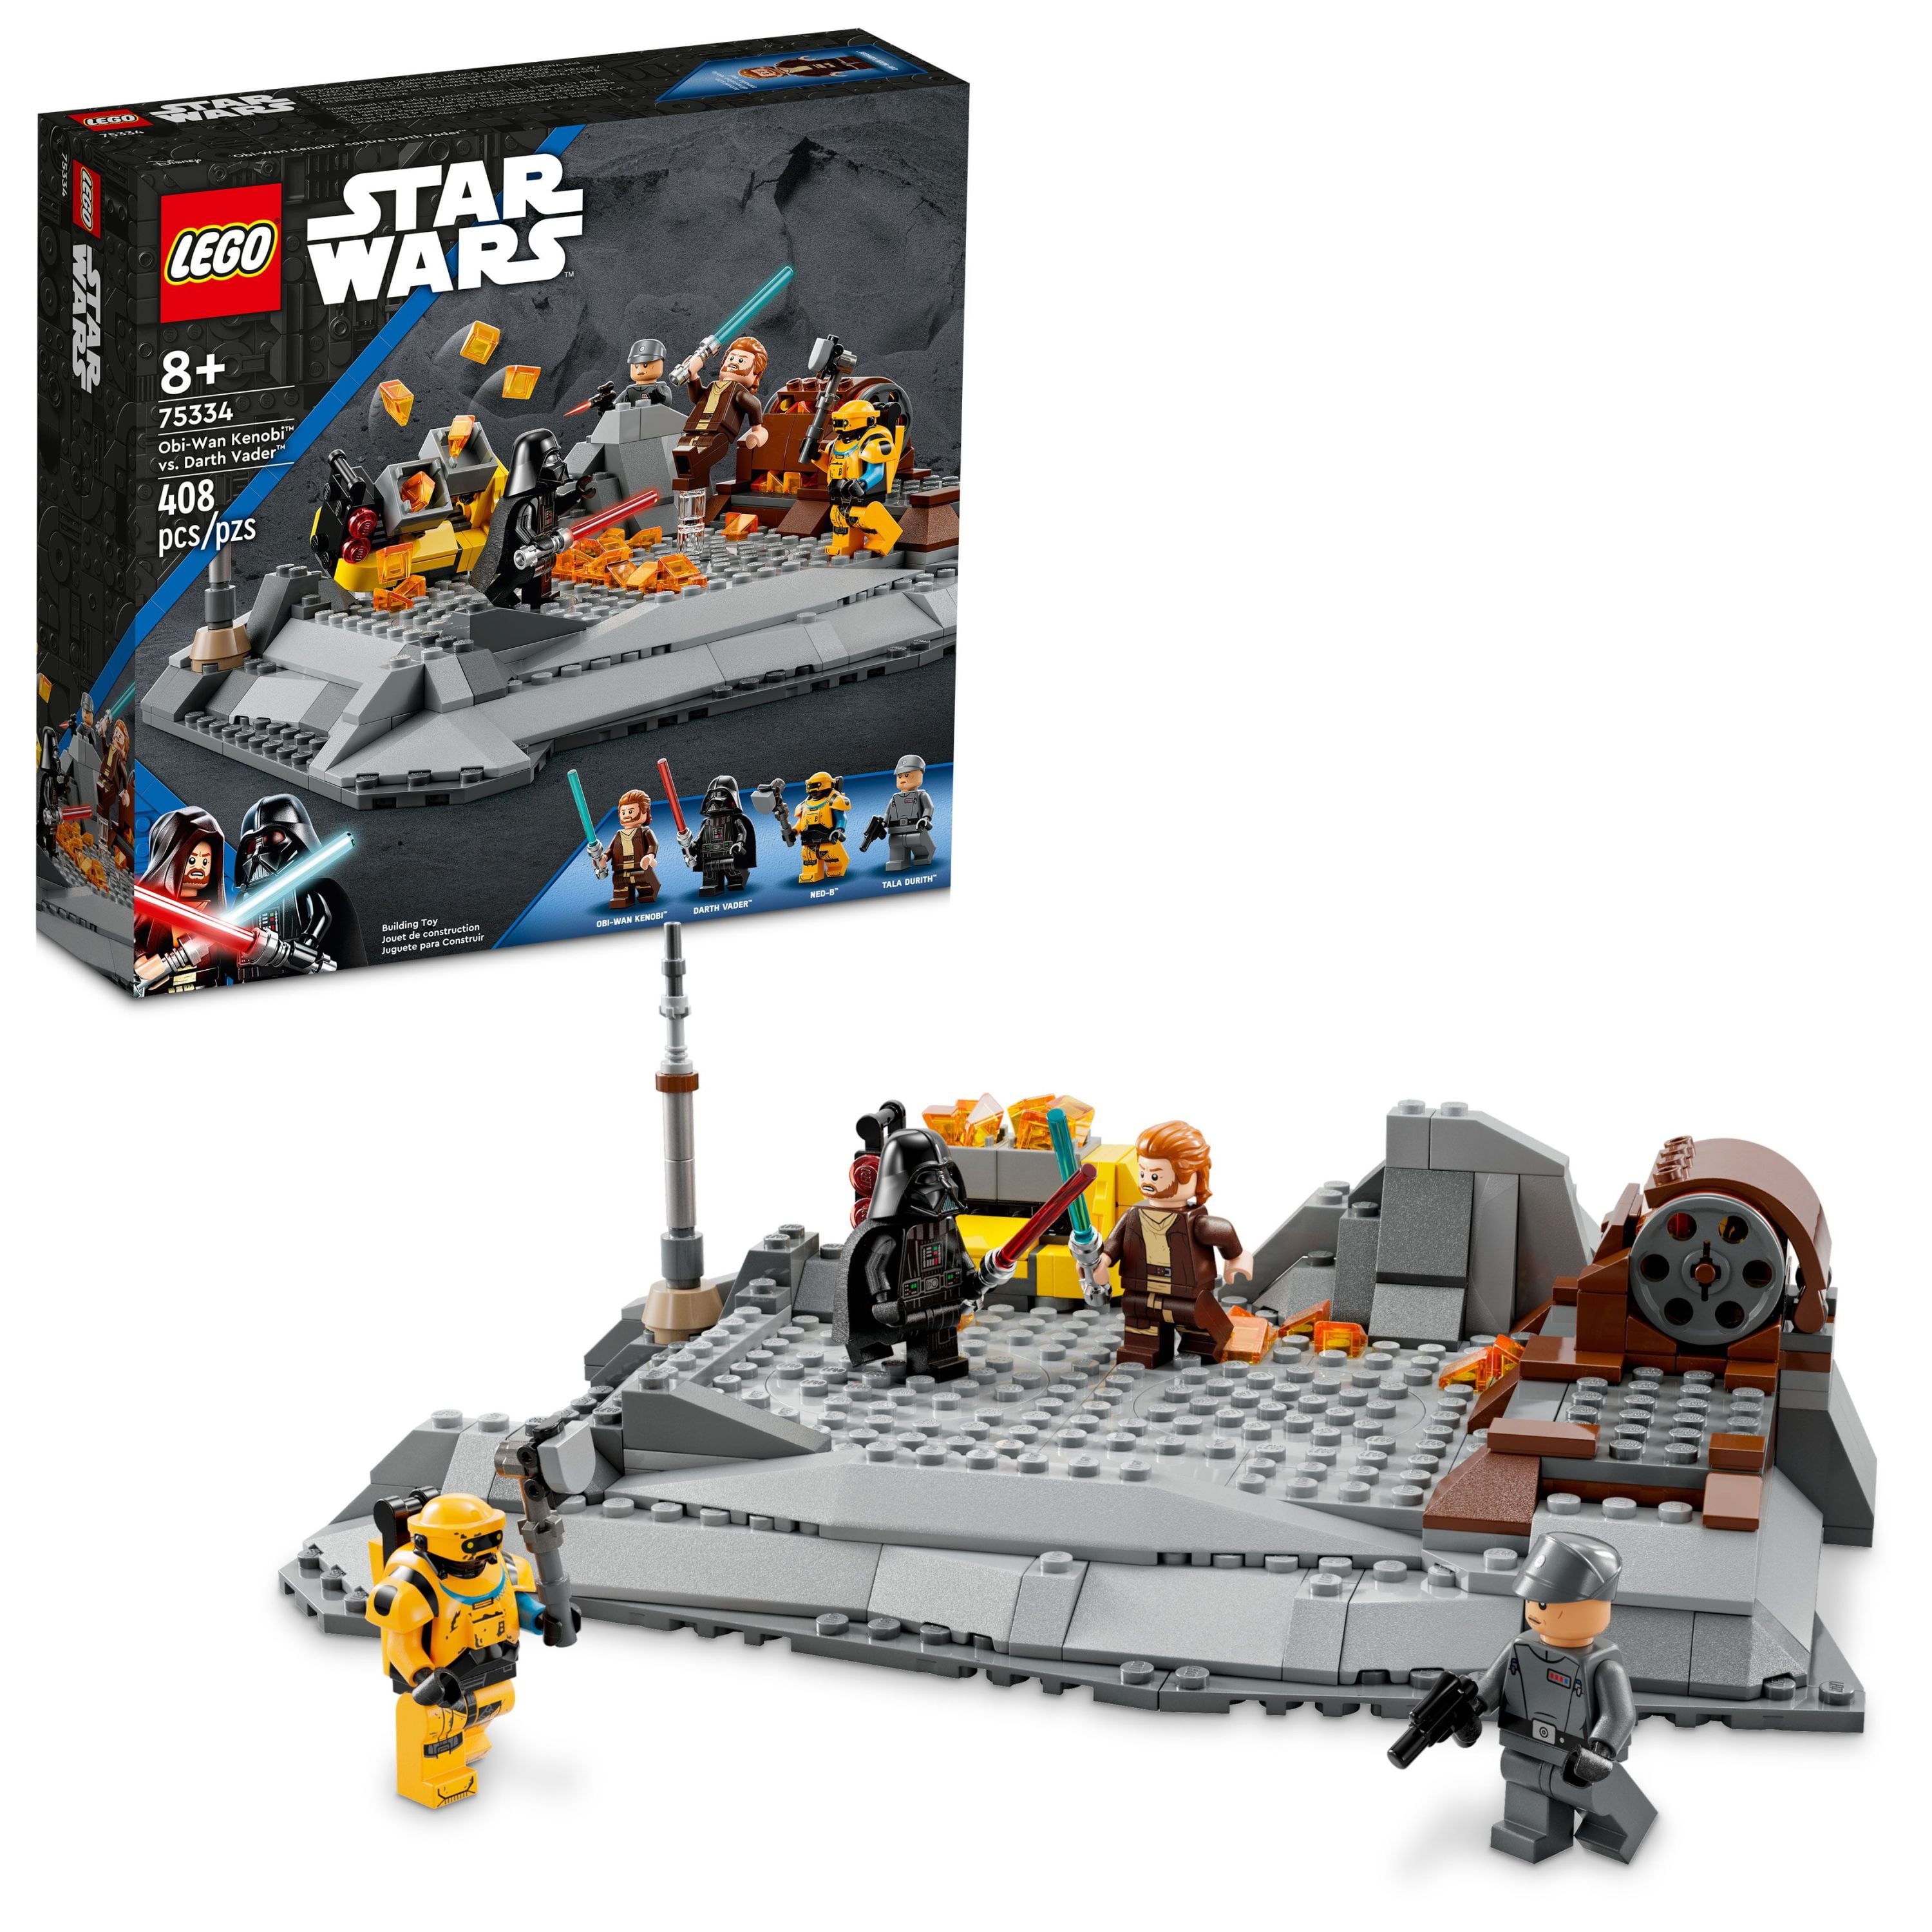 LEGO Star Wars Obi-Wan Kenobi vs. Darth Vader 75334, Buildable Action Toy, Battlefield Playset with 4 Minifigures and Lightsabers, Collectible Set